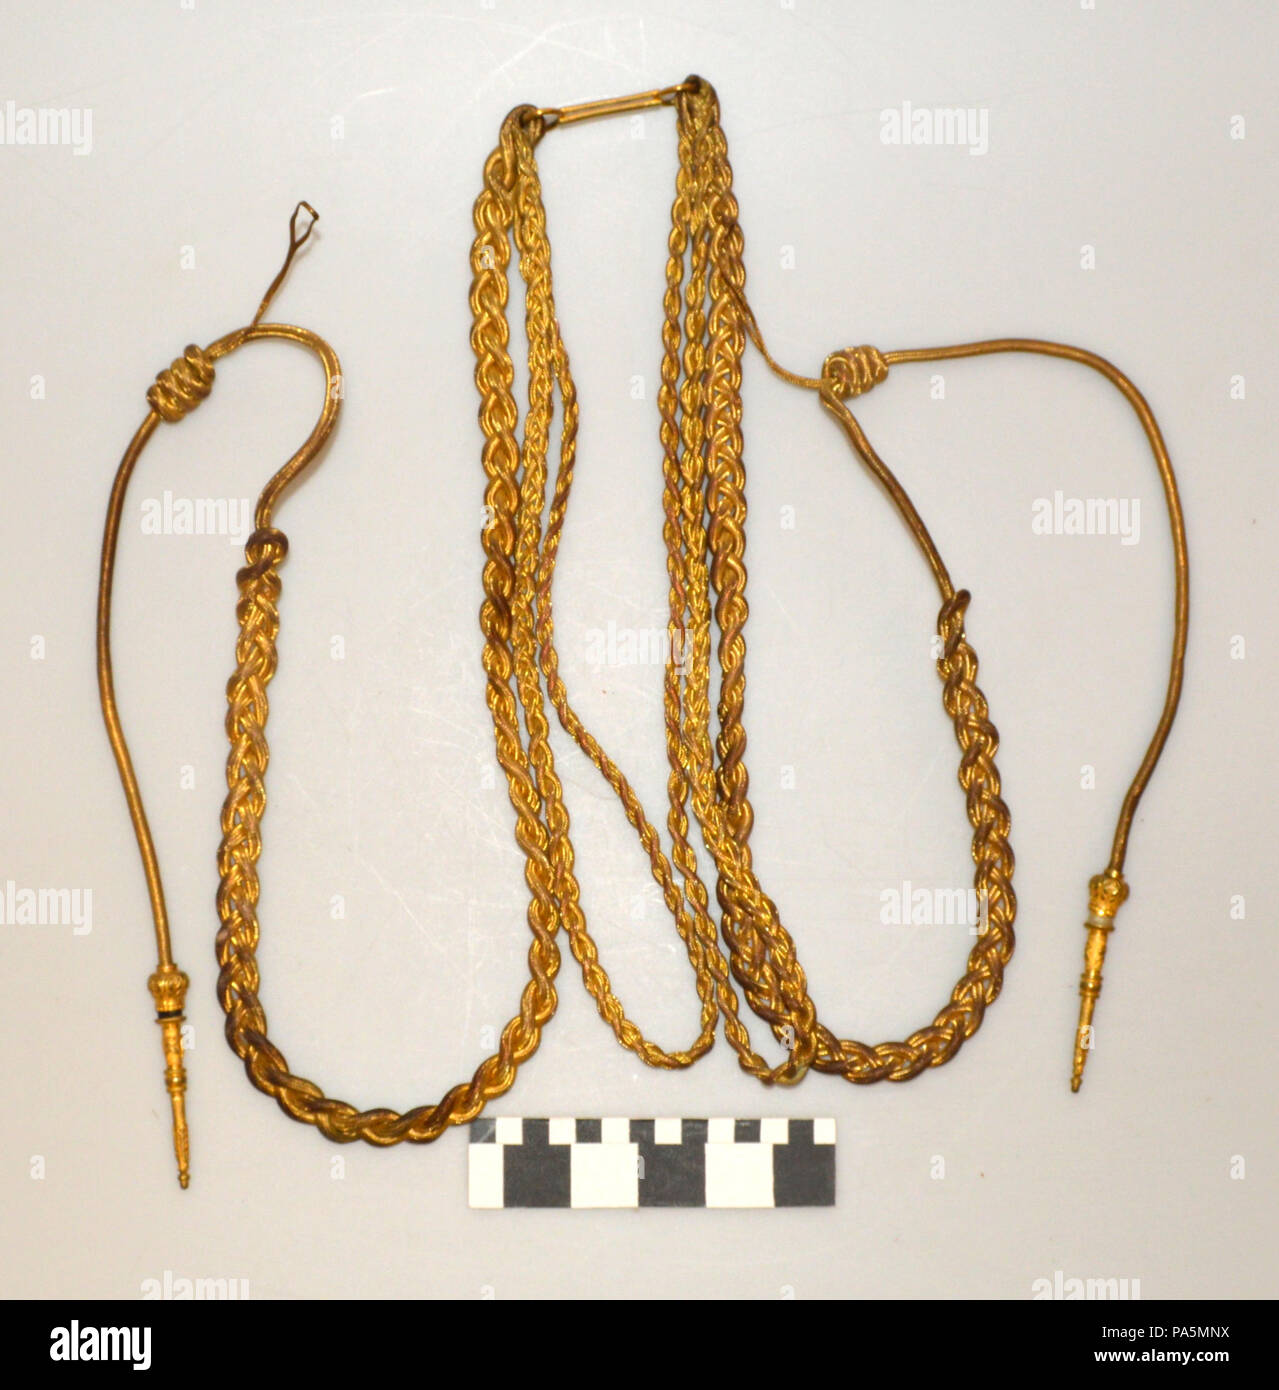 716 Gold Braided Aiguillette Stock Photo